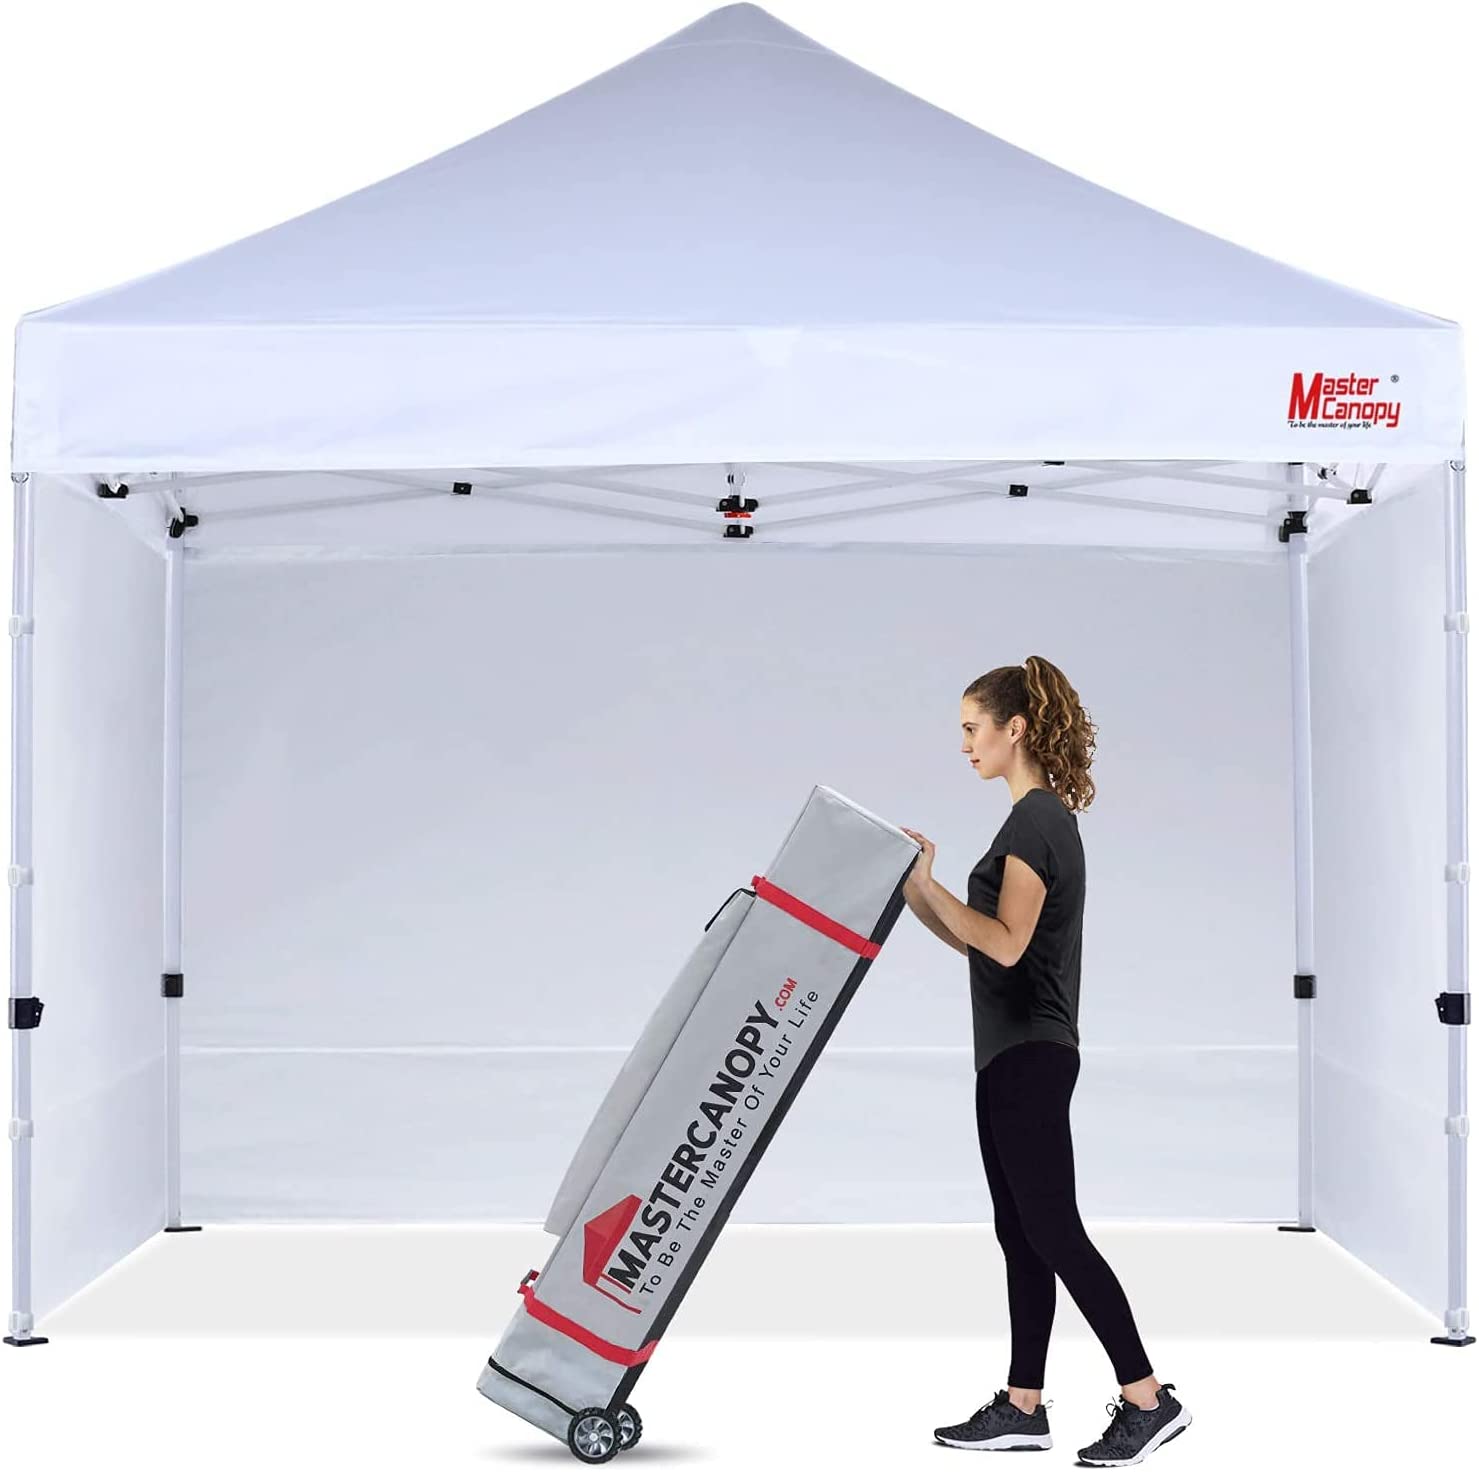 MASTERCANOPY UV Protection Canopy Tent With Removable Sidewalls